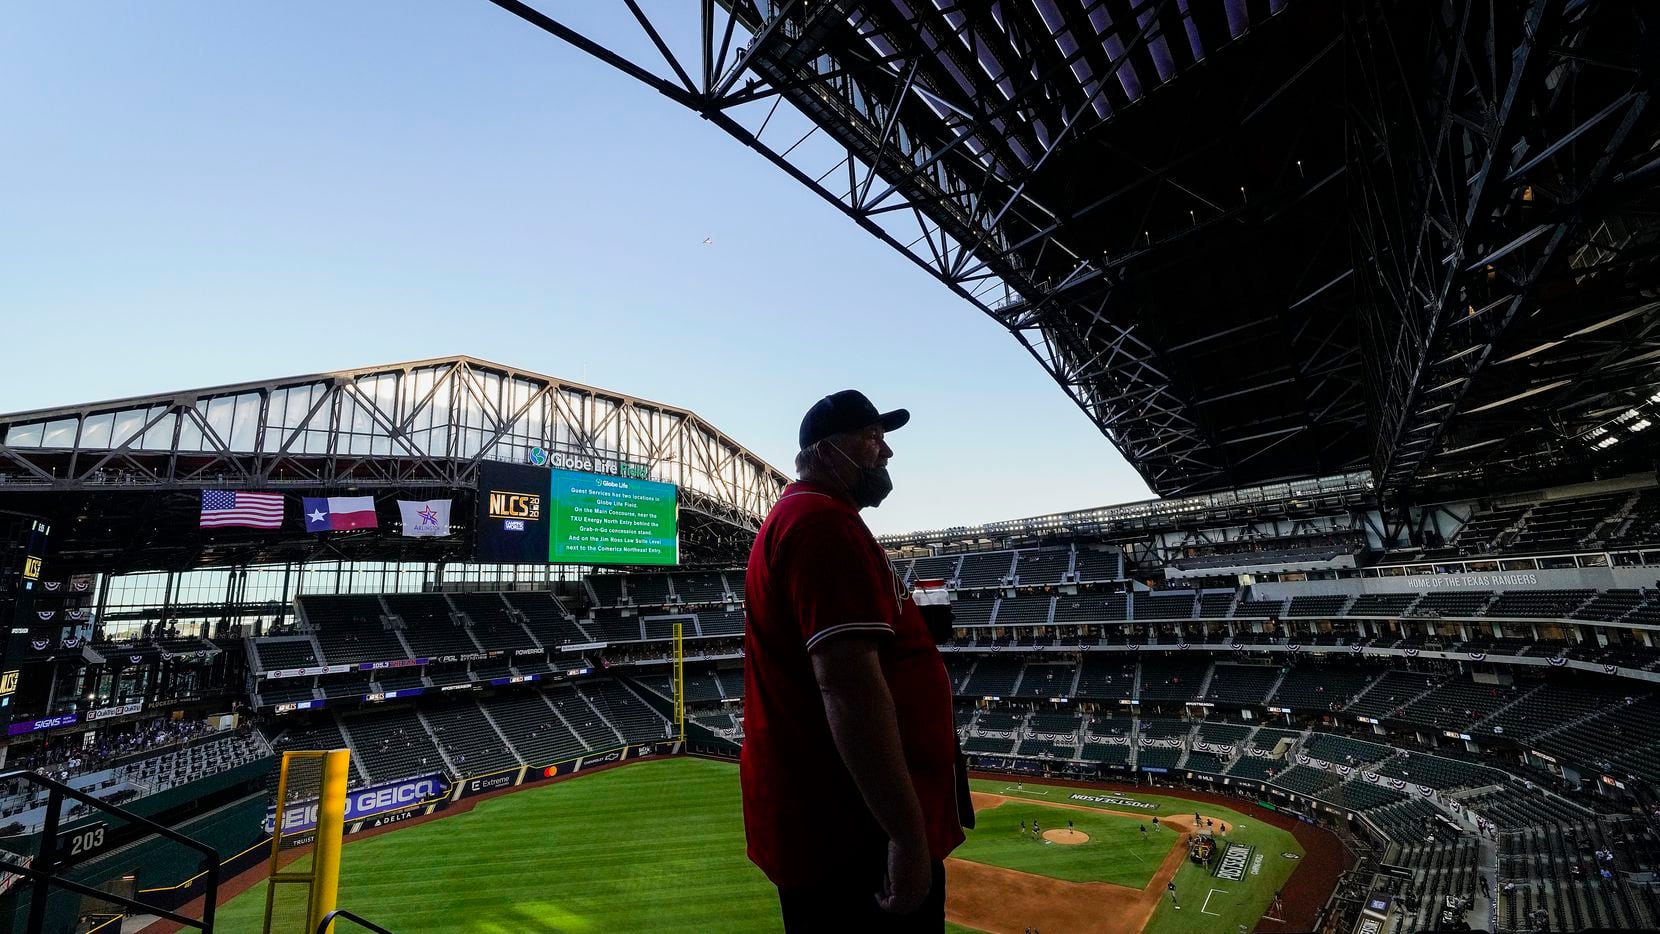 Atlanta Braves fan Michael DeBord, who is originally from Atlanta but now lives in North Texas, watches the retractable roof opening before Game 1 of a National League Championship Series between the Los Angeles Dodgers and the Atlanta Braves at Globe Life Field on Monday, Oct. 12, 2020.